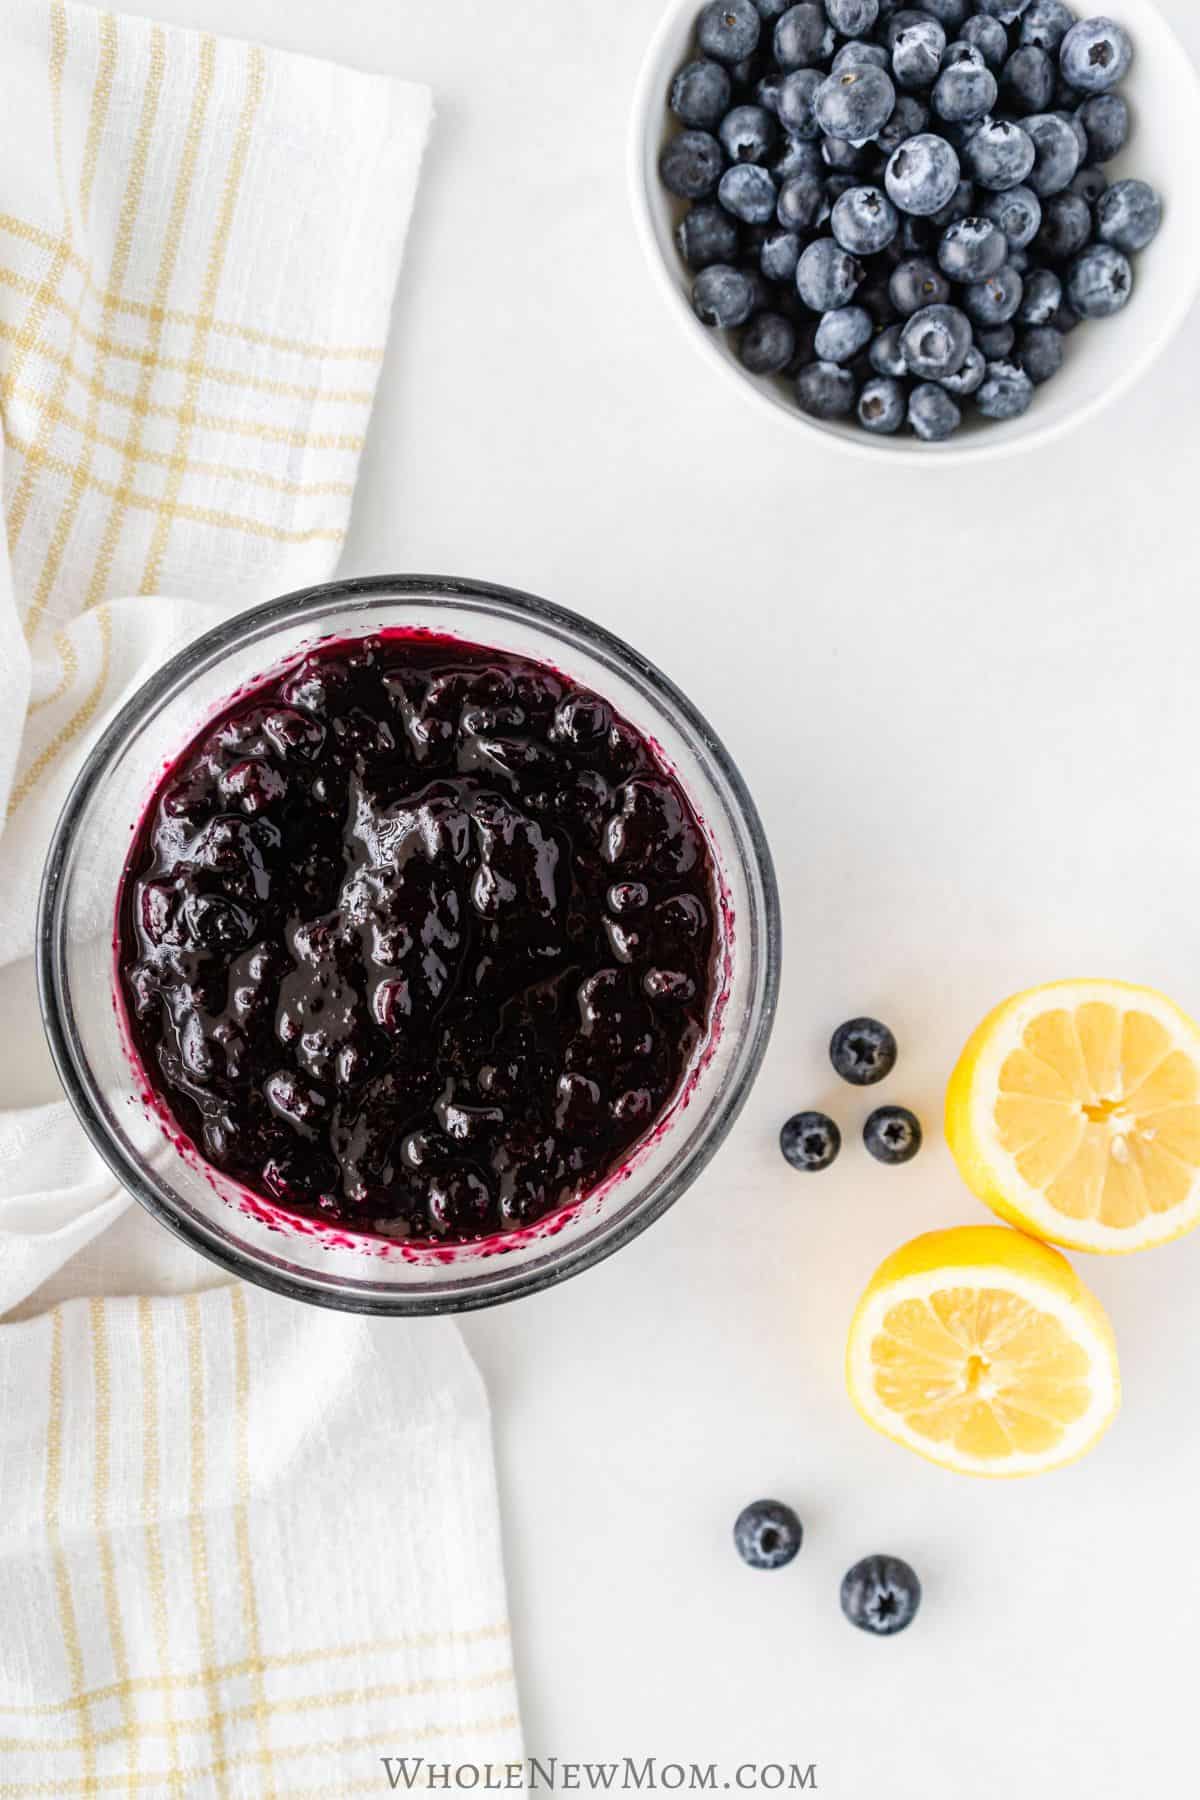 Easy healthy recipes with berries